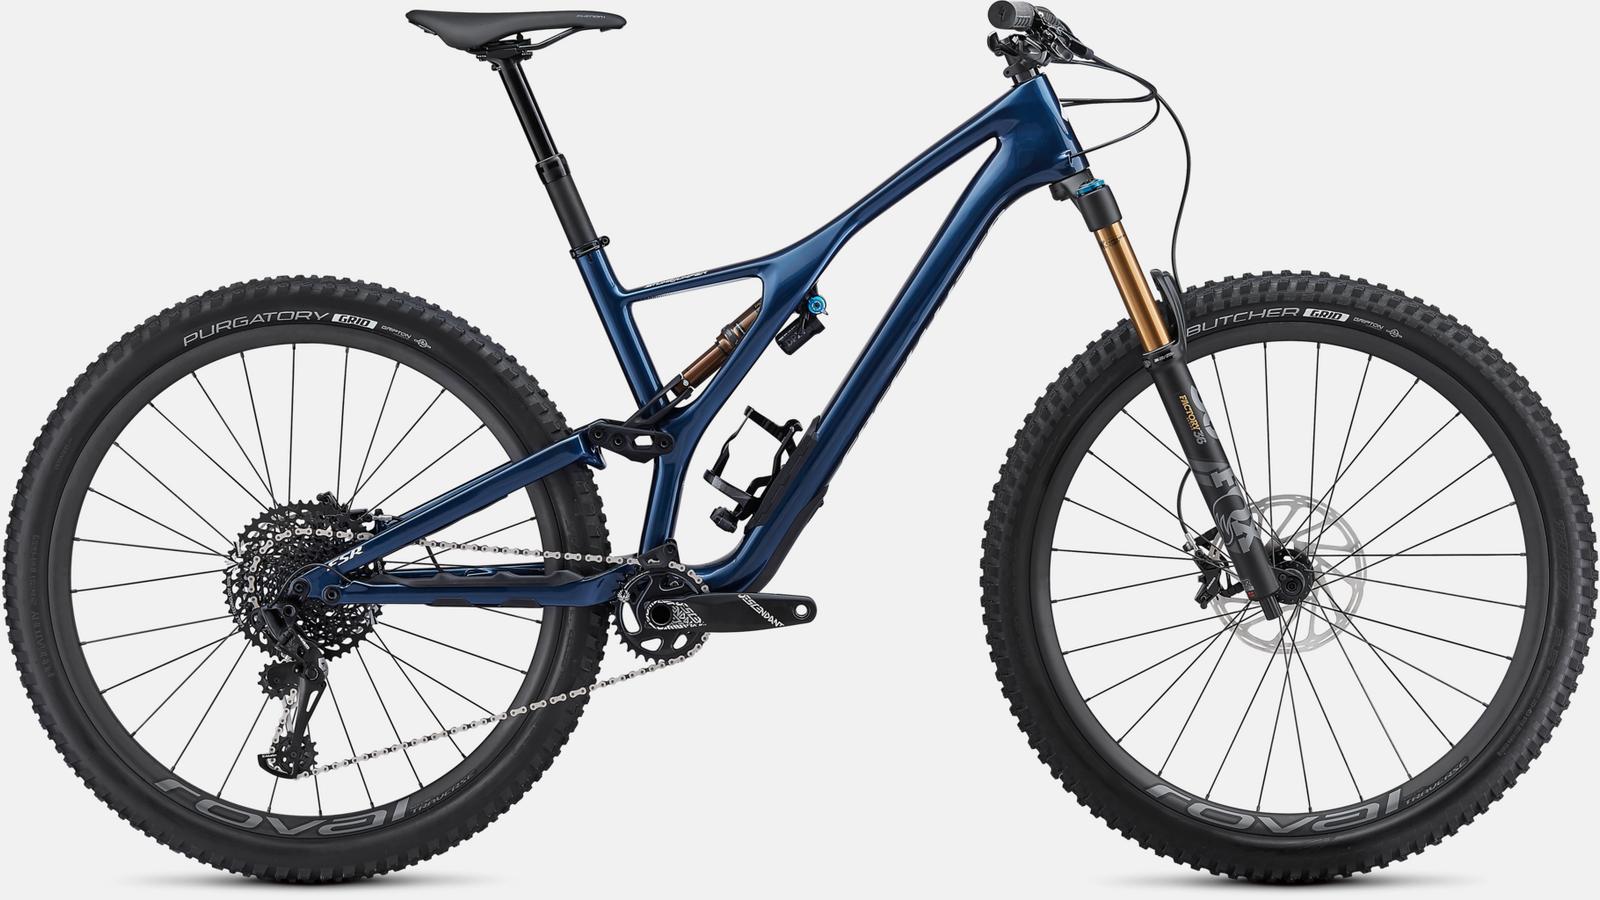 Touch-up paint for 2019 Specialized Men's Stumpjumper Pro 29 - Gloss Navy